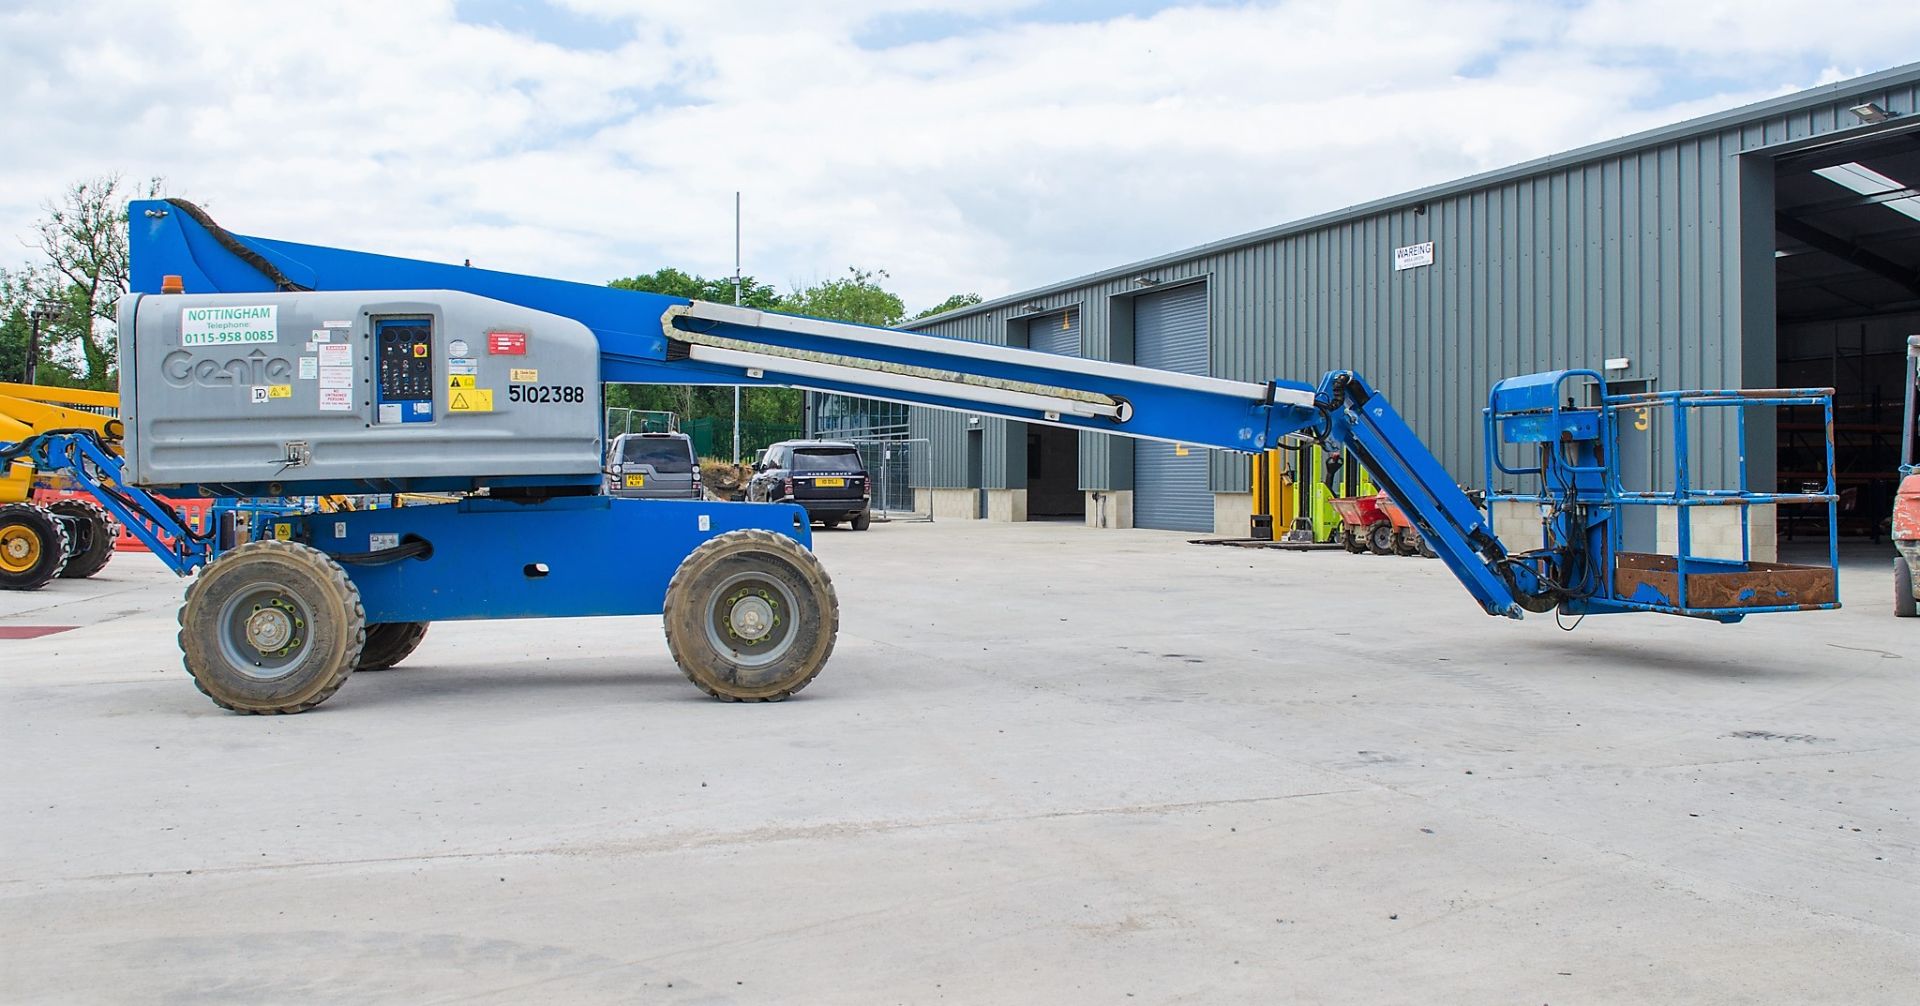 Genie S-45 diesel driven 45 ft boom lift access platform Year: 2014 S/N: 54514-18197 Recorded Hours: - Image 8 of 18